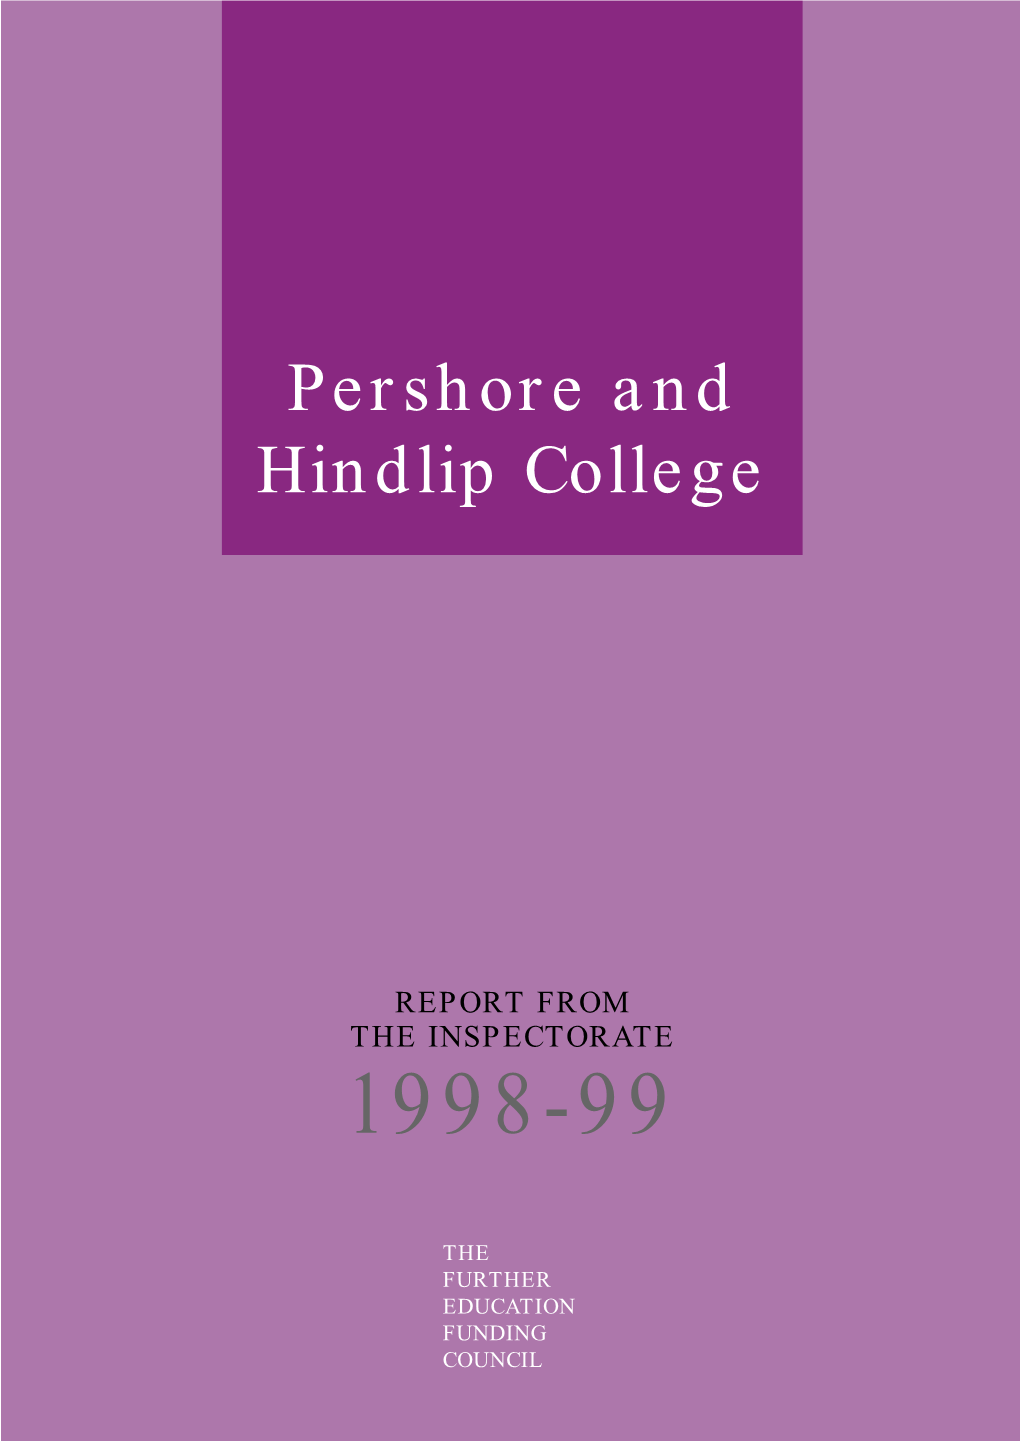 Pershore and Hindlip College